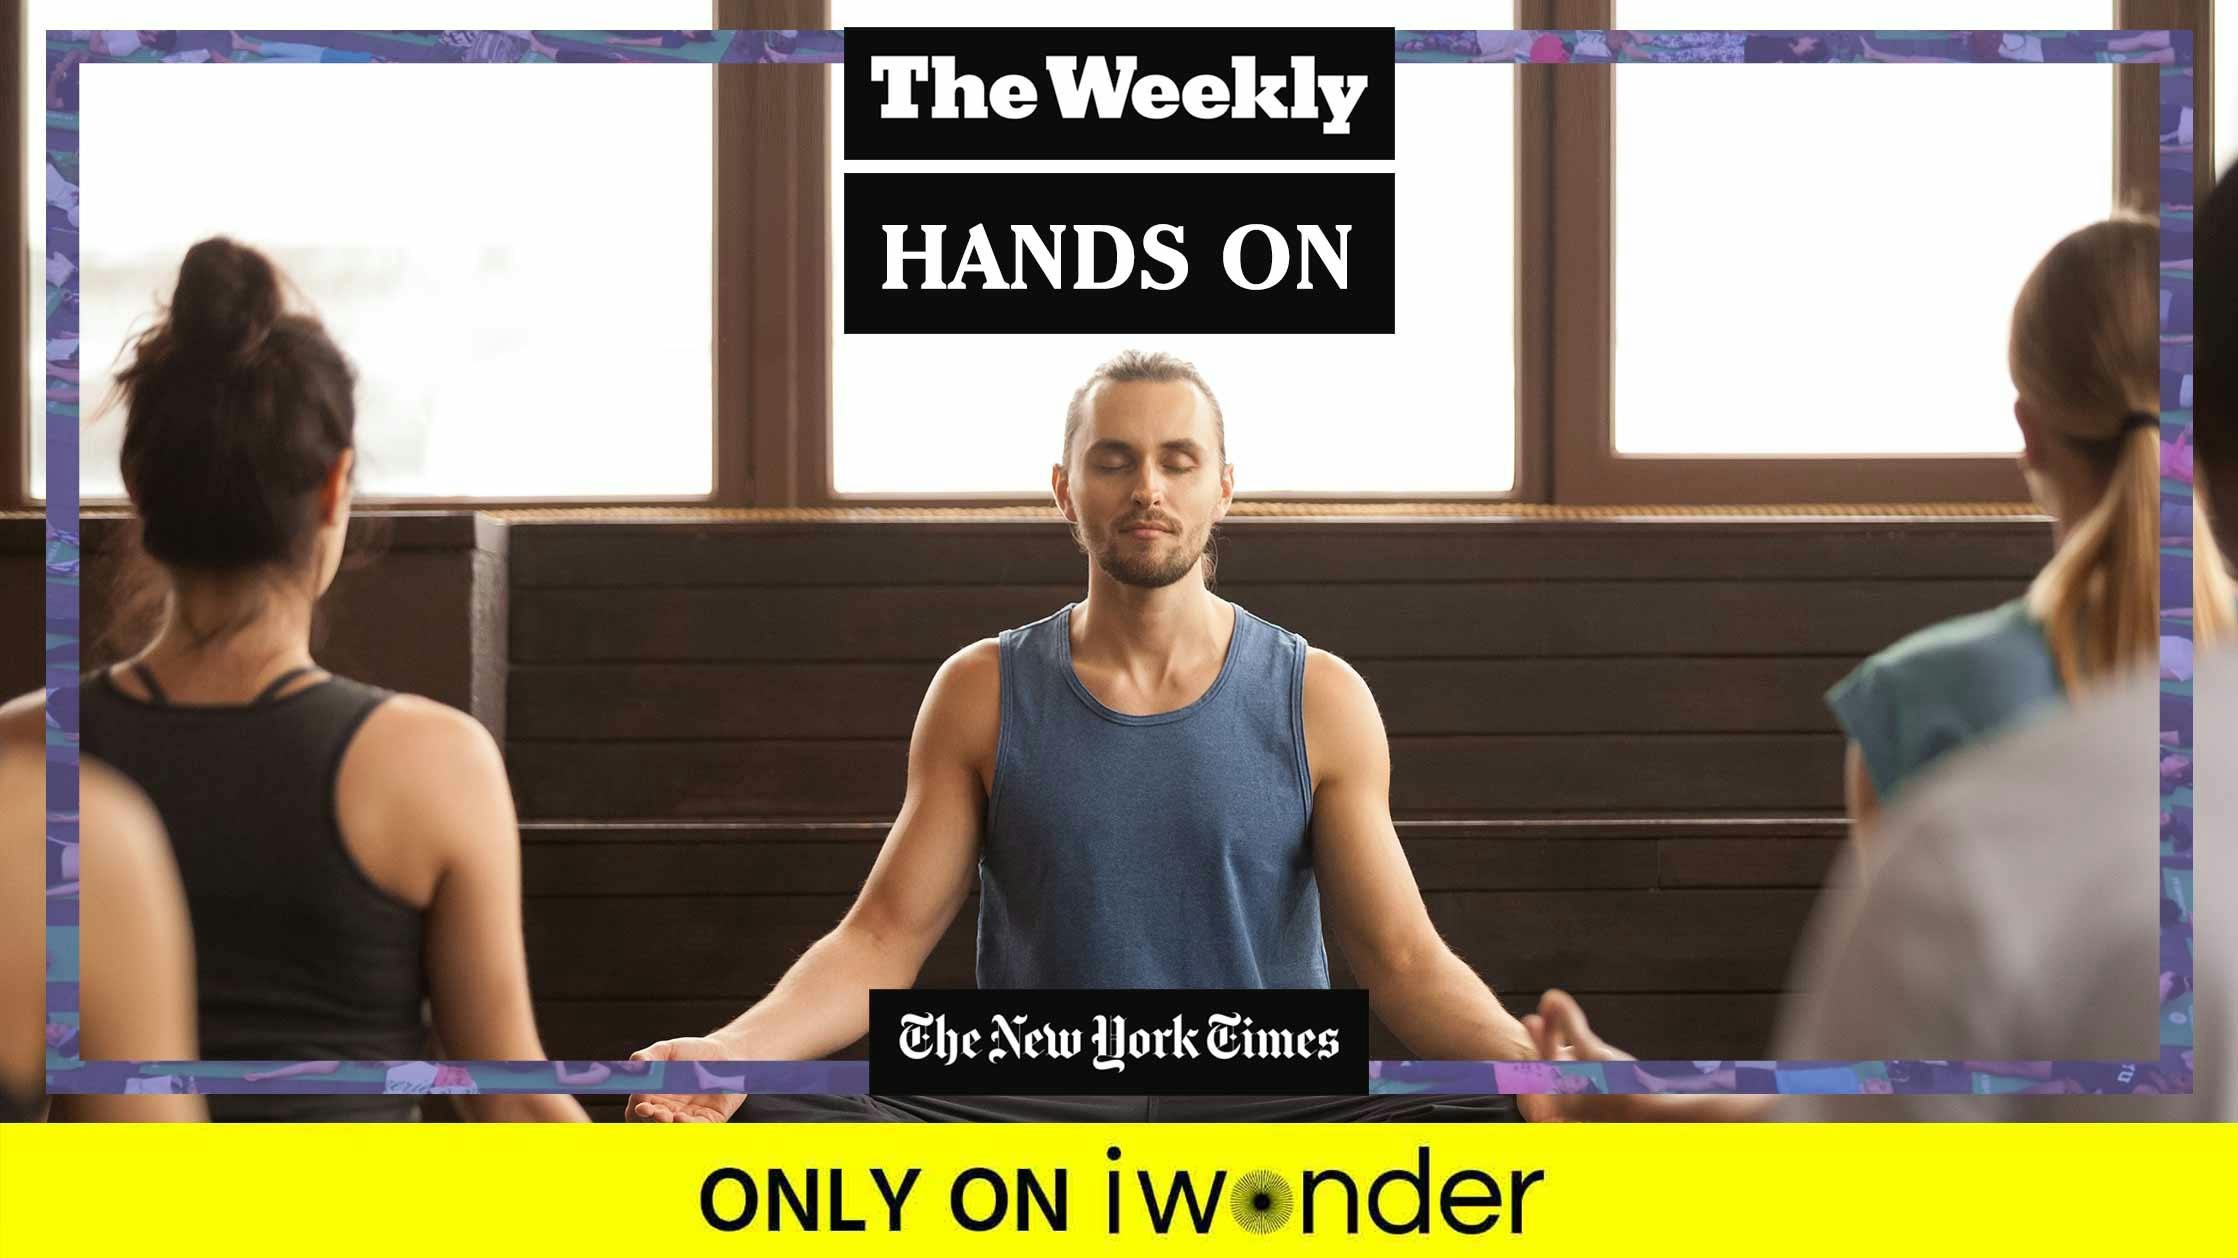 The Weekly: Hands On